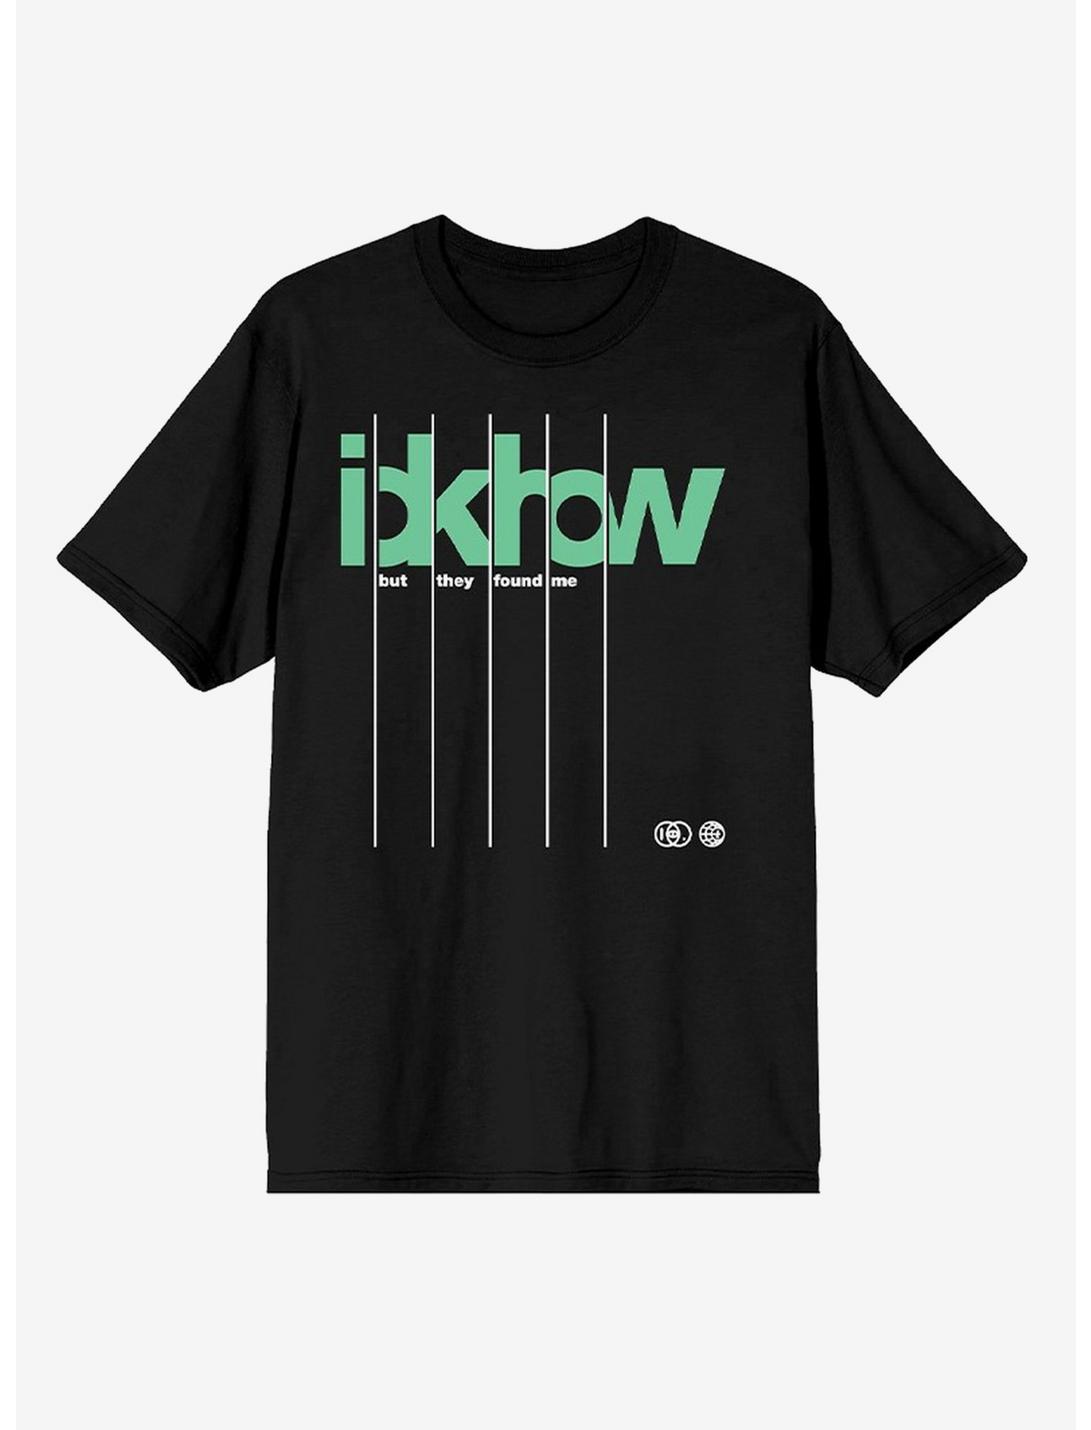 I Don't Know How But They Found Me Lined Logo Boyfriend Fit Girls T-Shirt, BLACK, hi-res